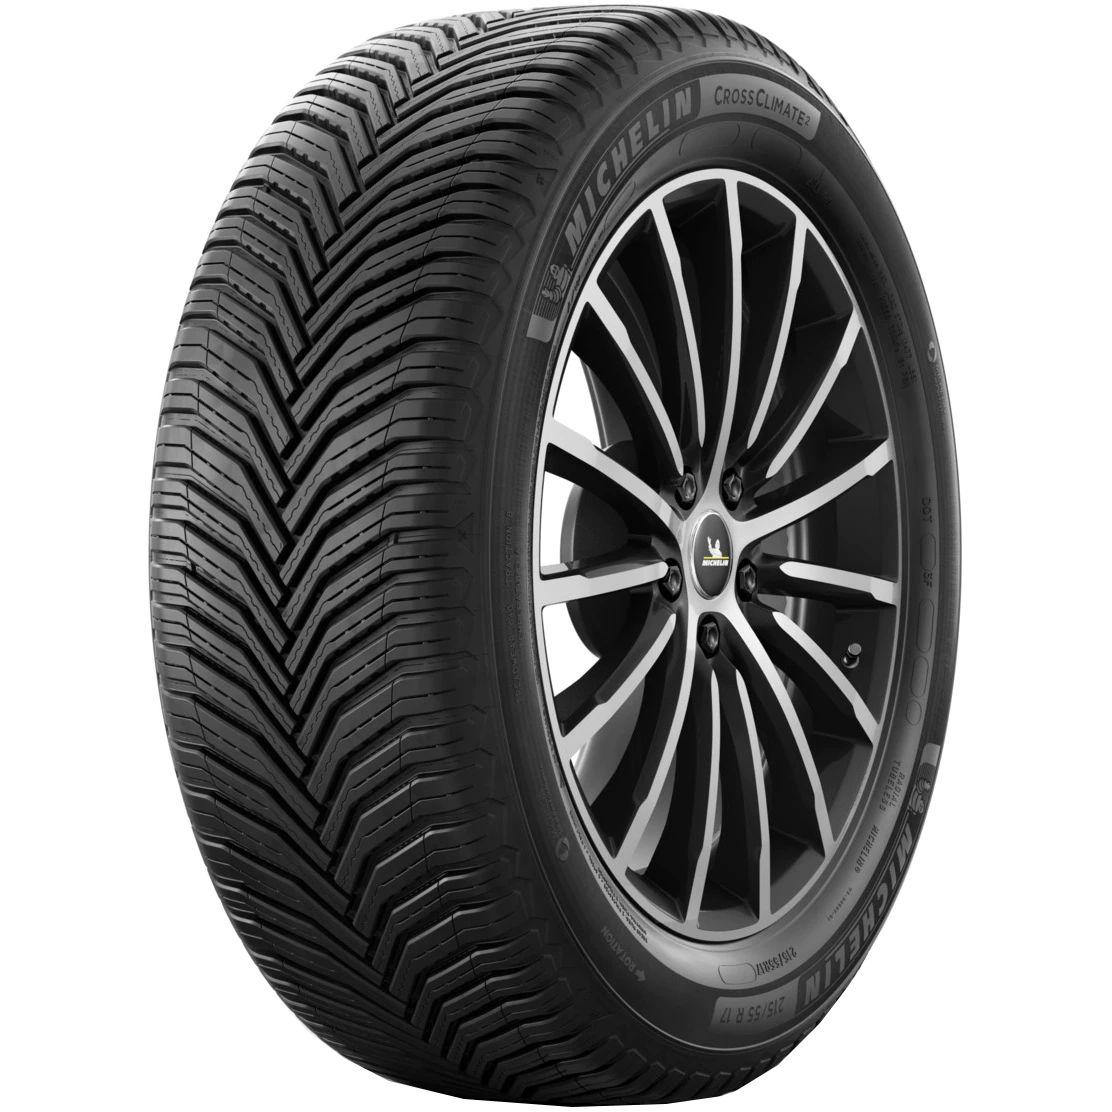 Anvelope all seasons MICHELIN CrossClimate2 M+S XL 205/60 R16 96H